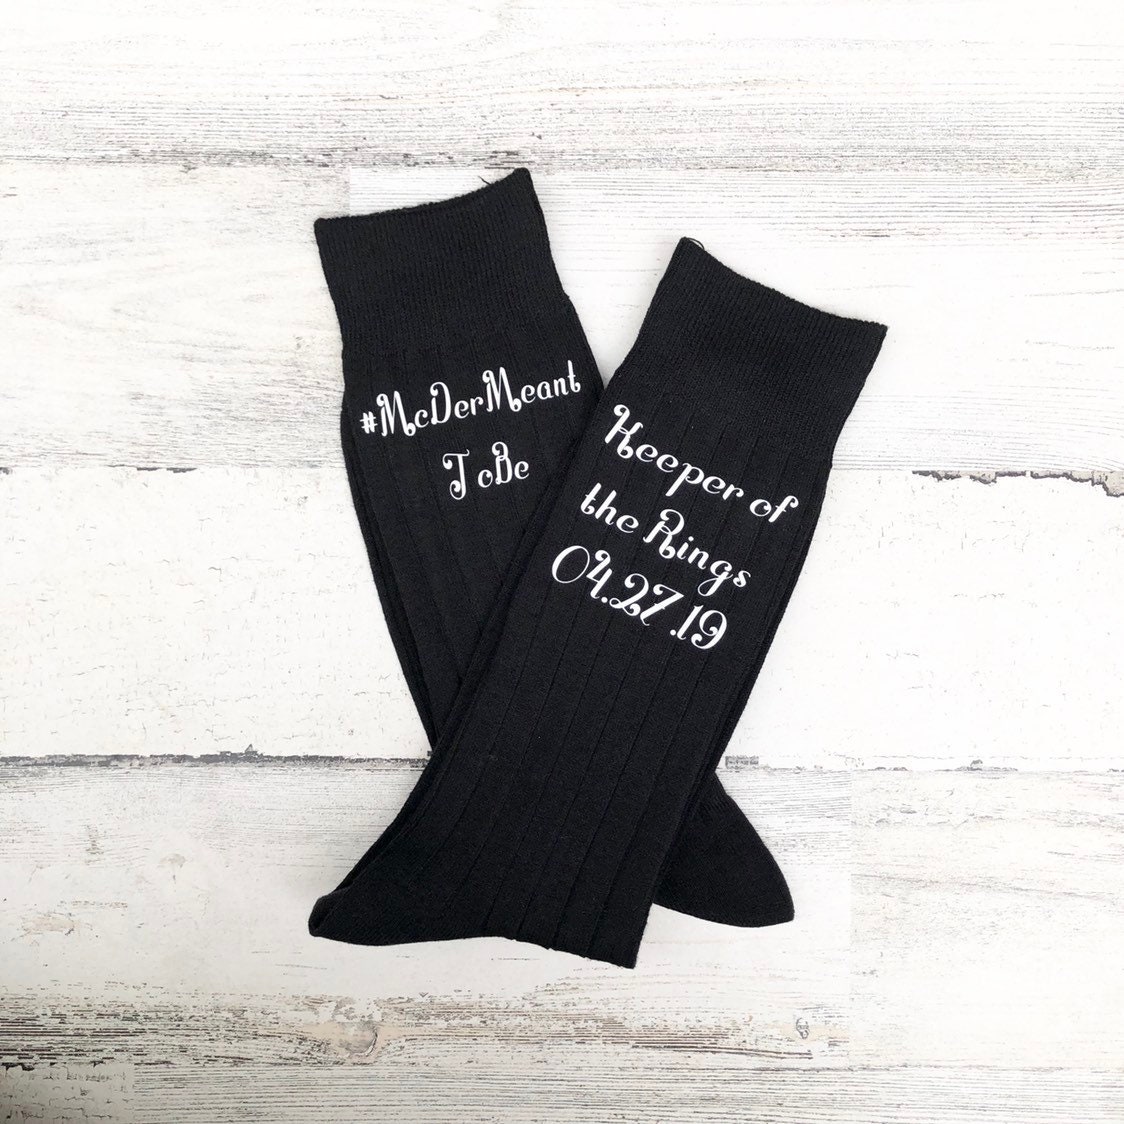 Socks for the ring bearer - adult keeper of the rings - special gift ...